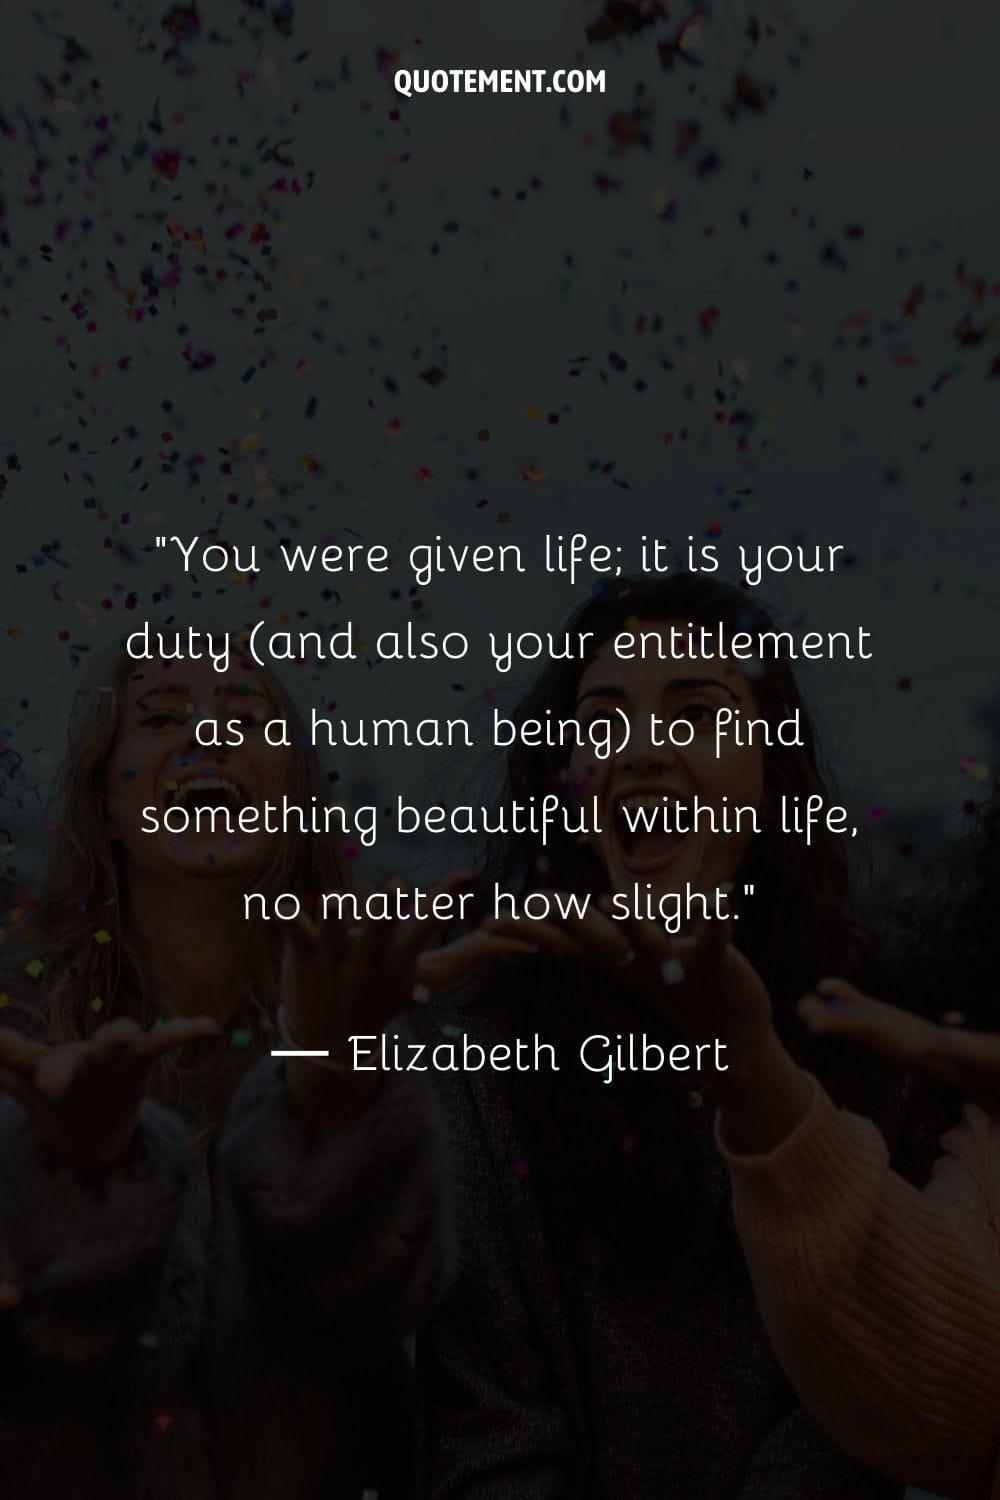 You were given life; it is your duty (and also your entitlement as a human being) to find something beautiful within life, no matter how slight.